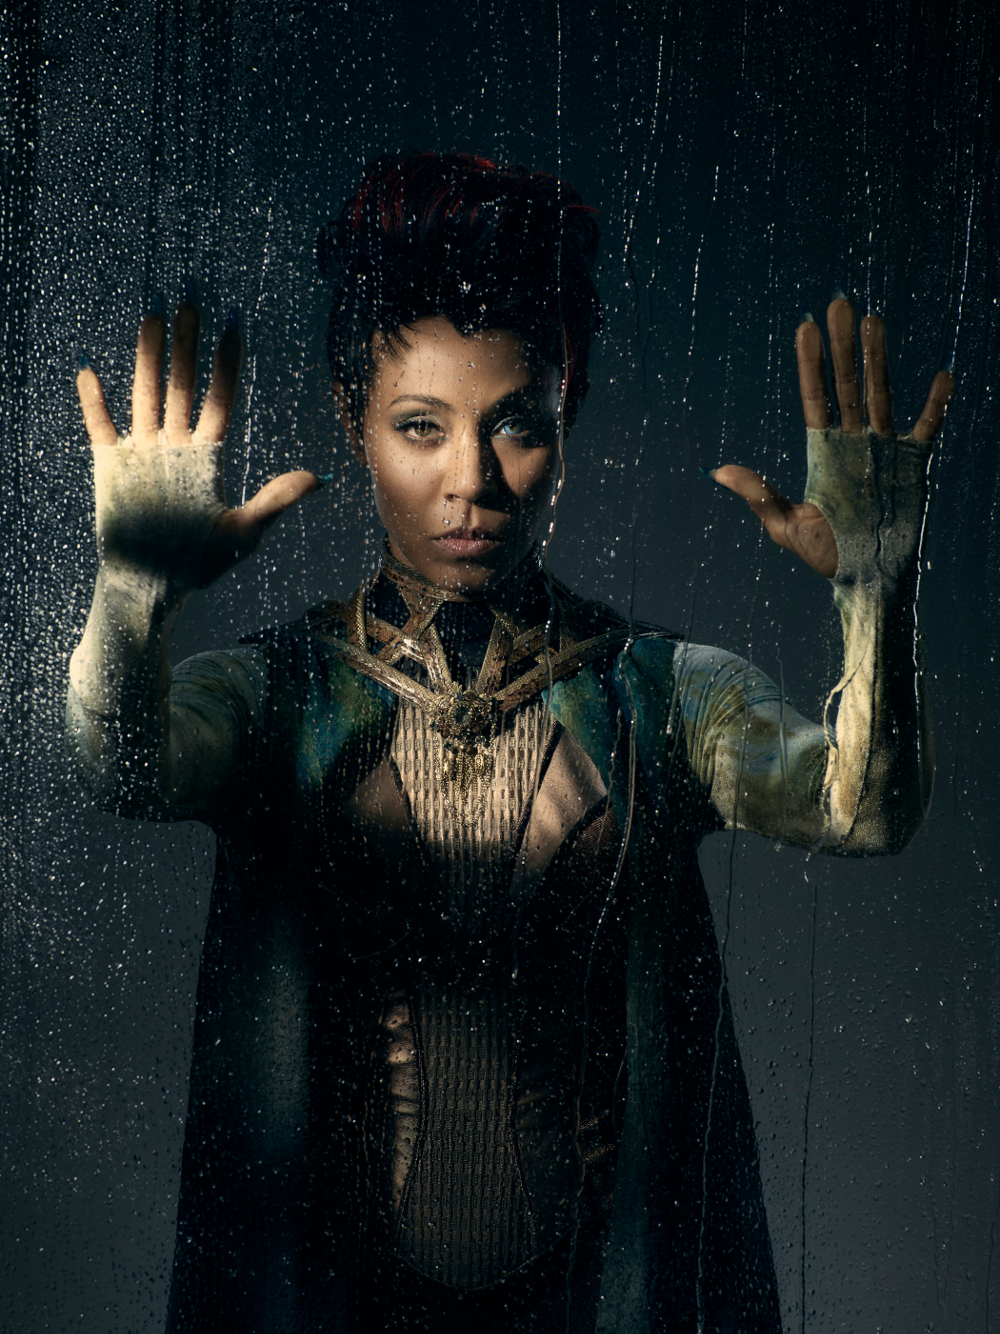 gotham-season-3-synopsis-teases-poison-ivy-and-mad-hatter-plus-character-portraits7.jpg